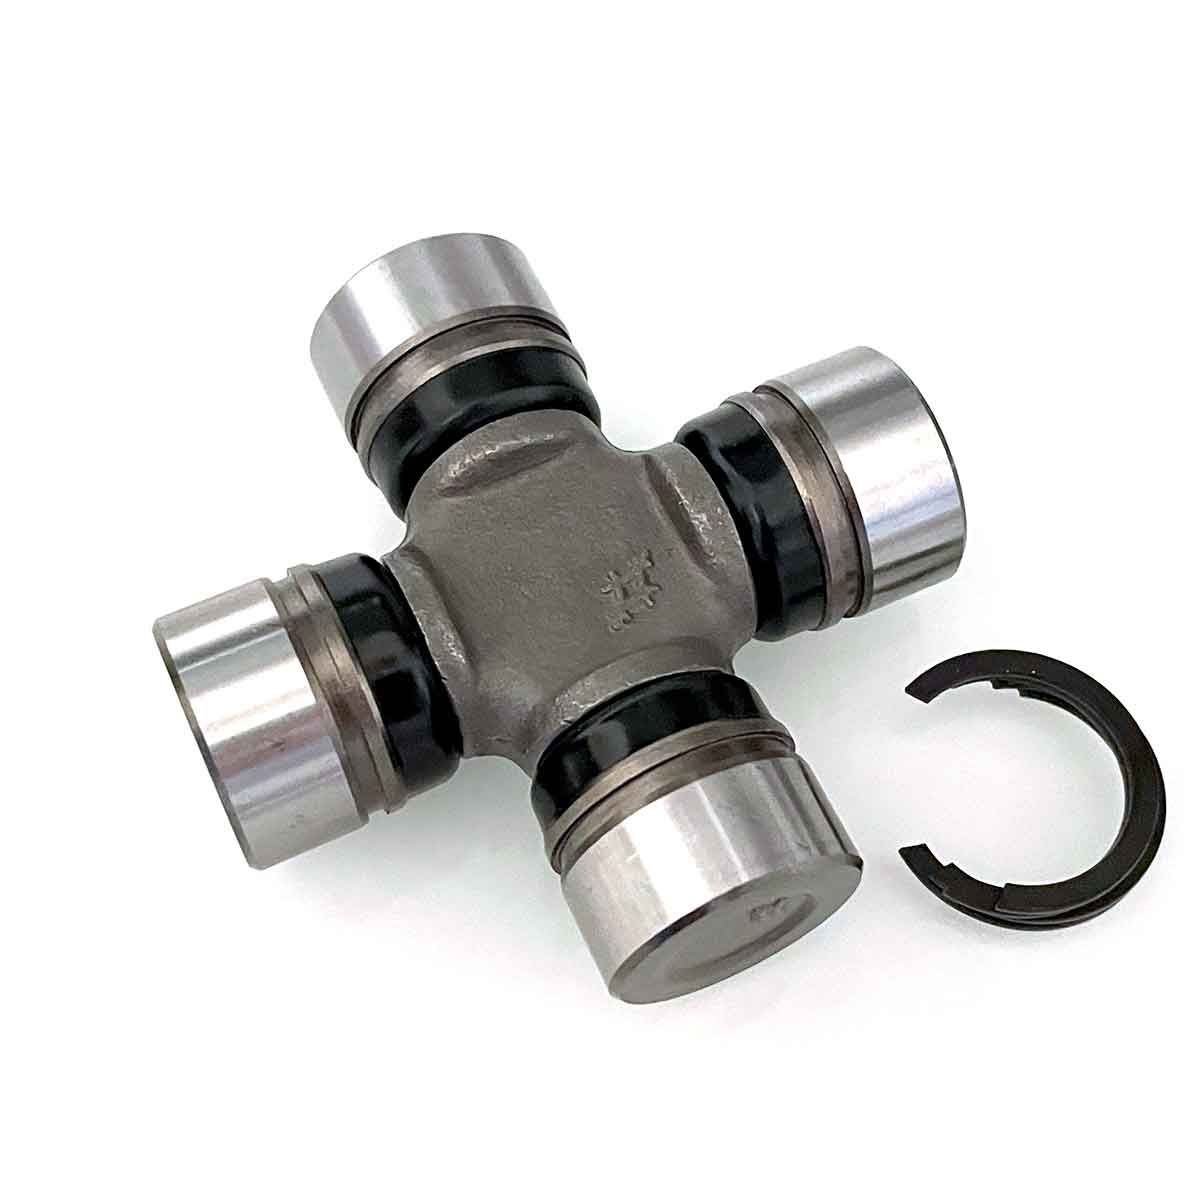 Axle star universal joint for Volvo Penta drives 853255 897707